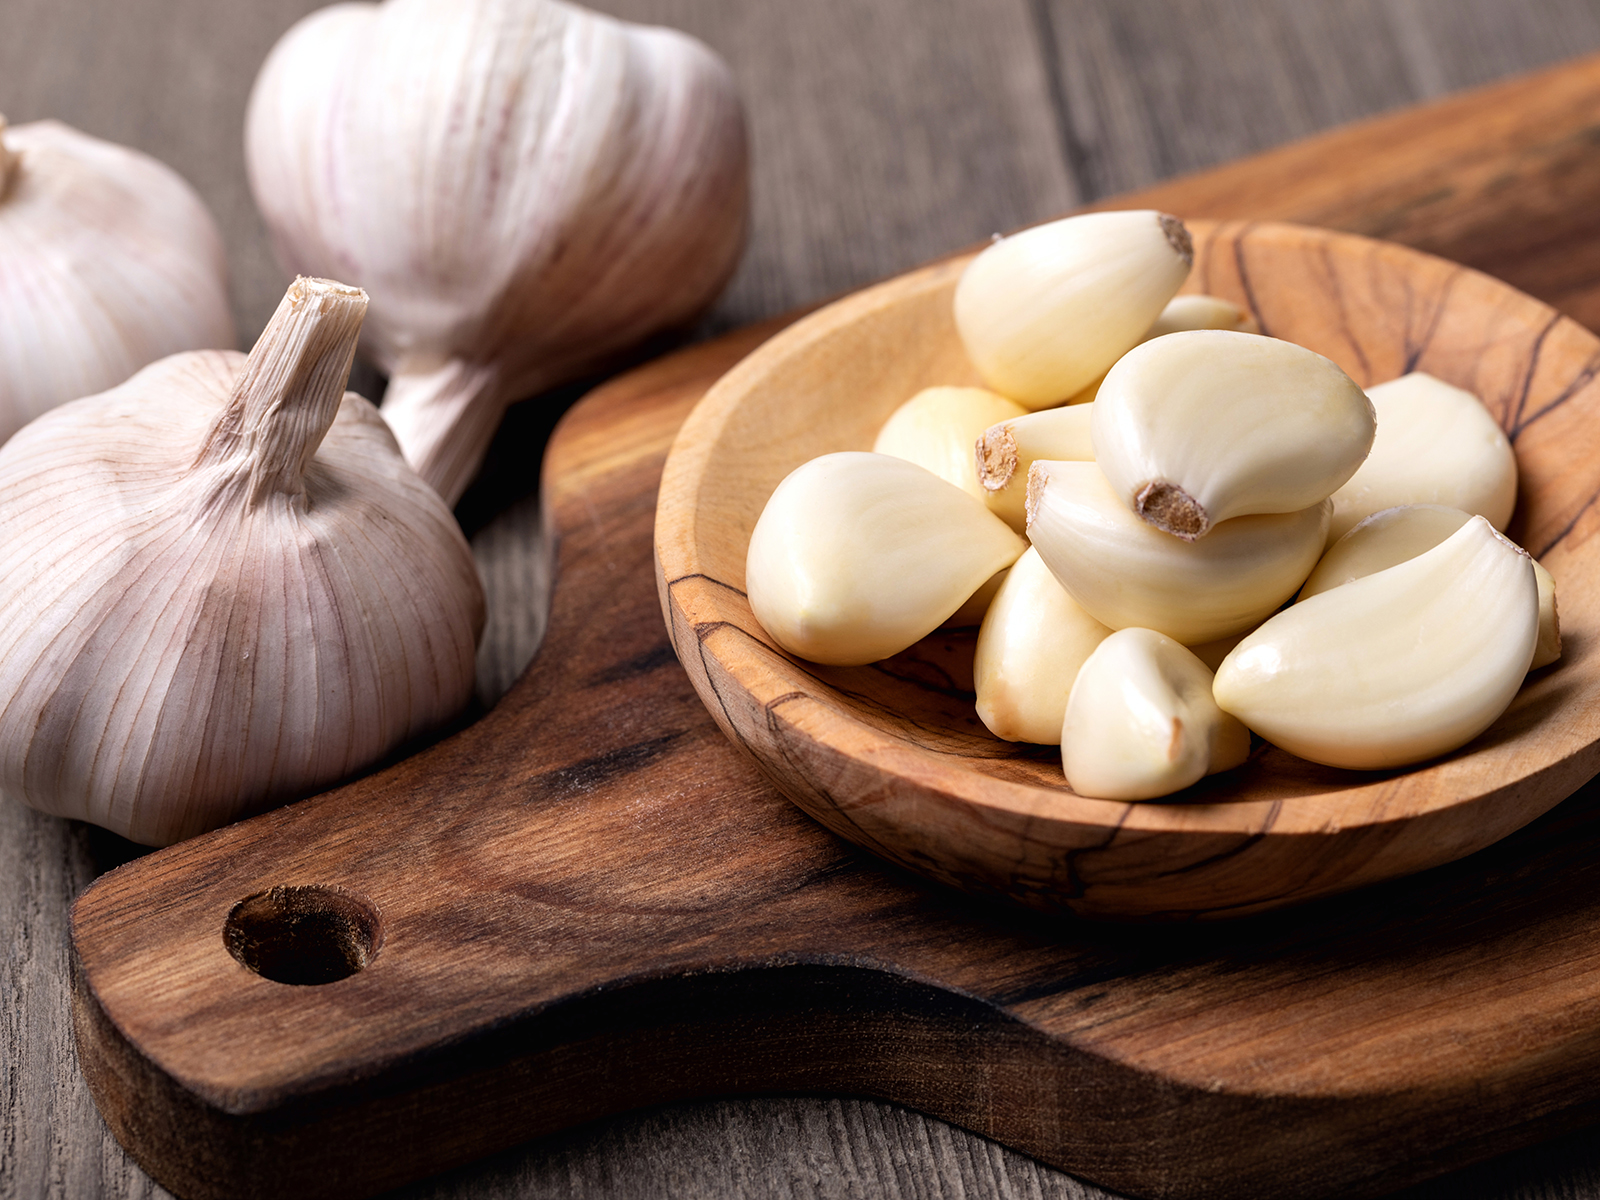 Can Garlic Help with Toothache?